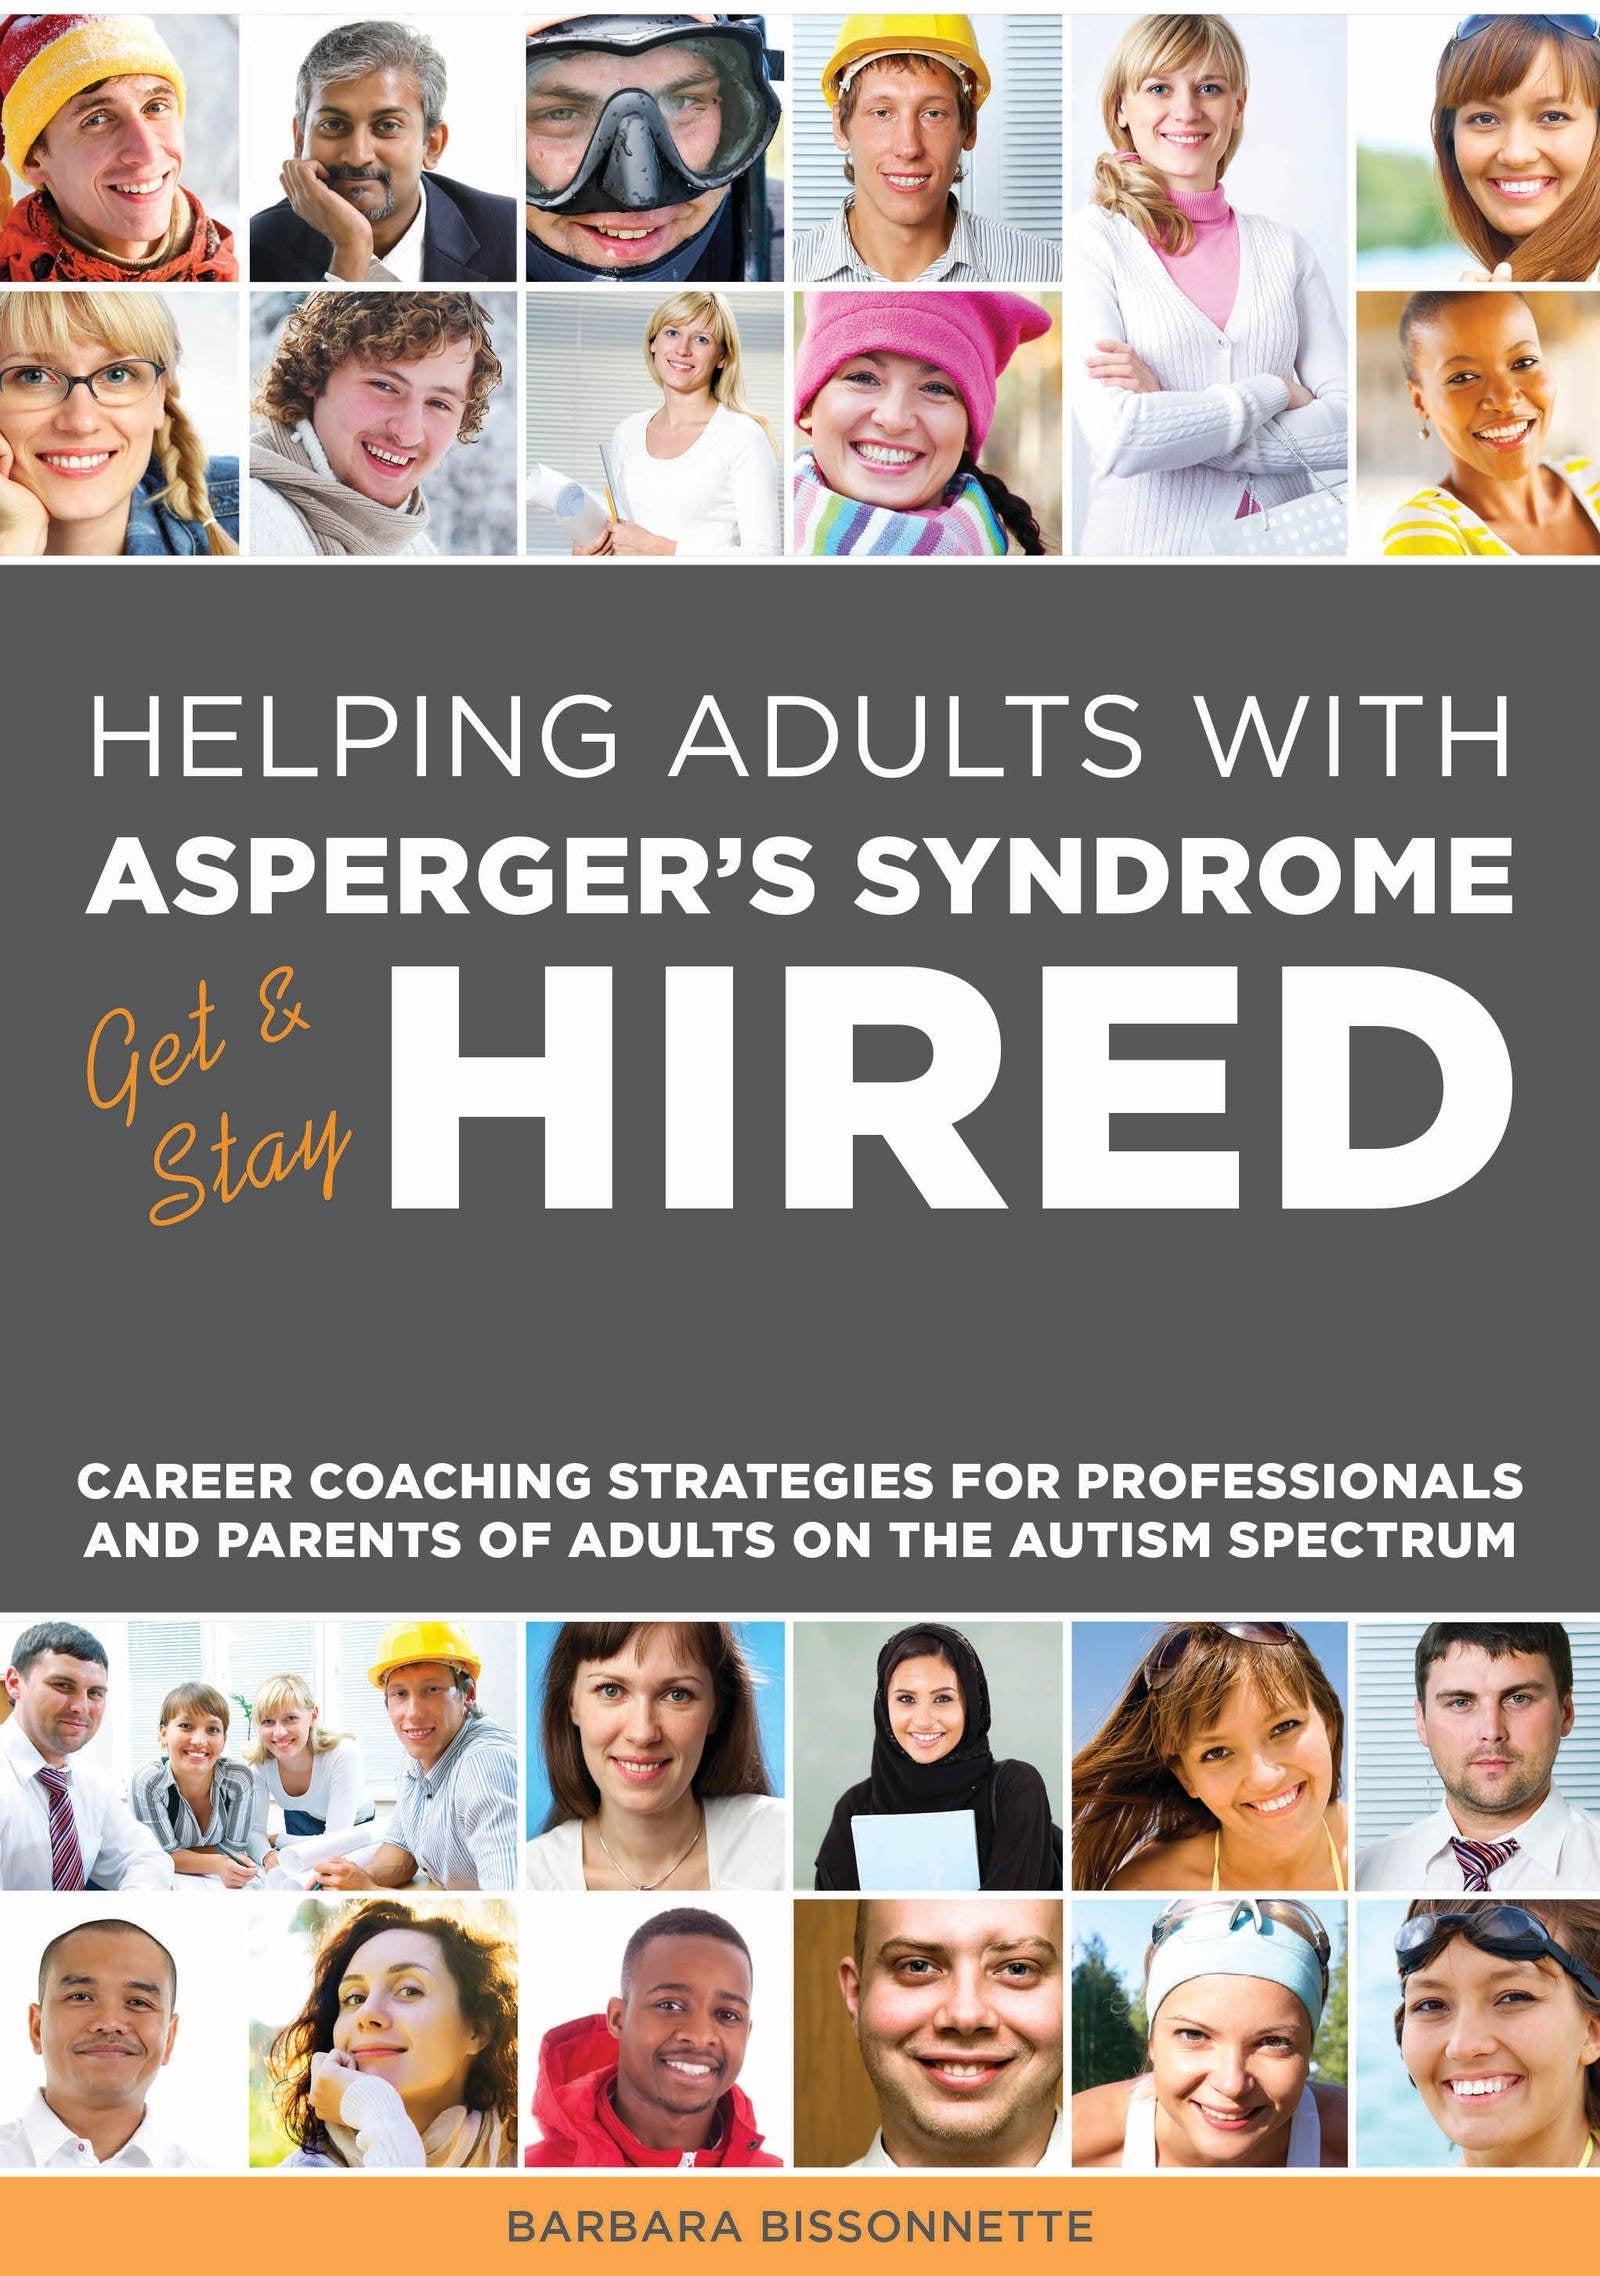 Helping Adults with Asperger's Syndrome Get & Stay Hired by Barbara Bissonnette